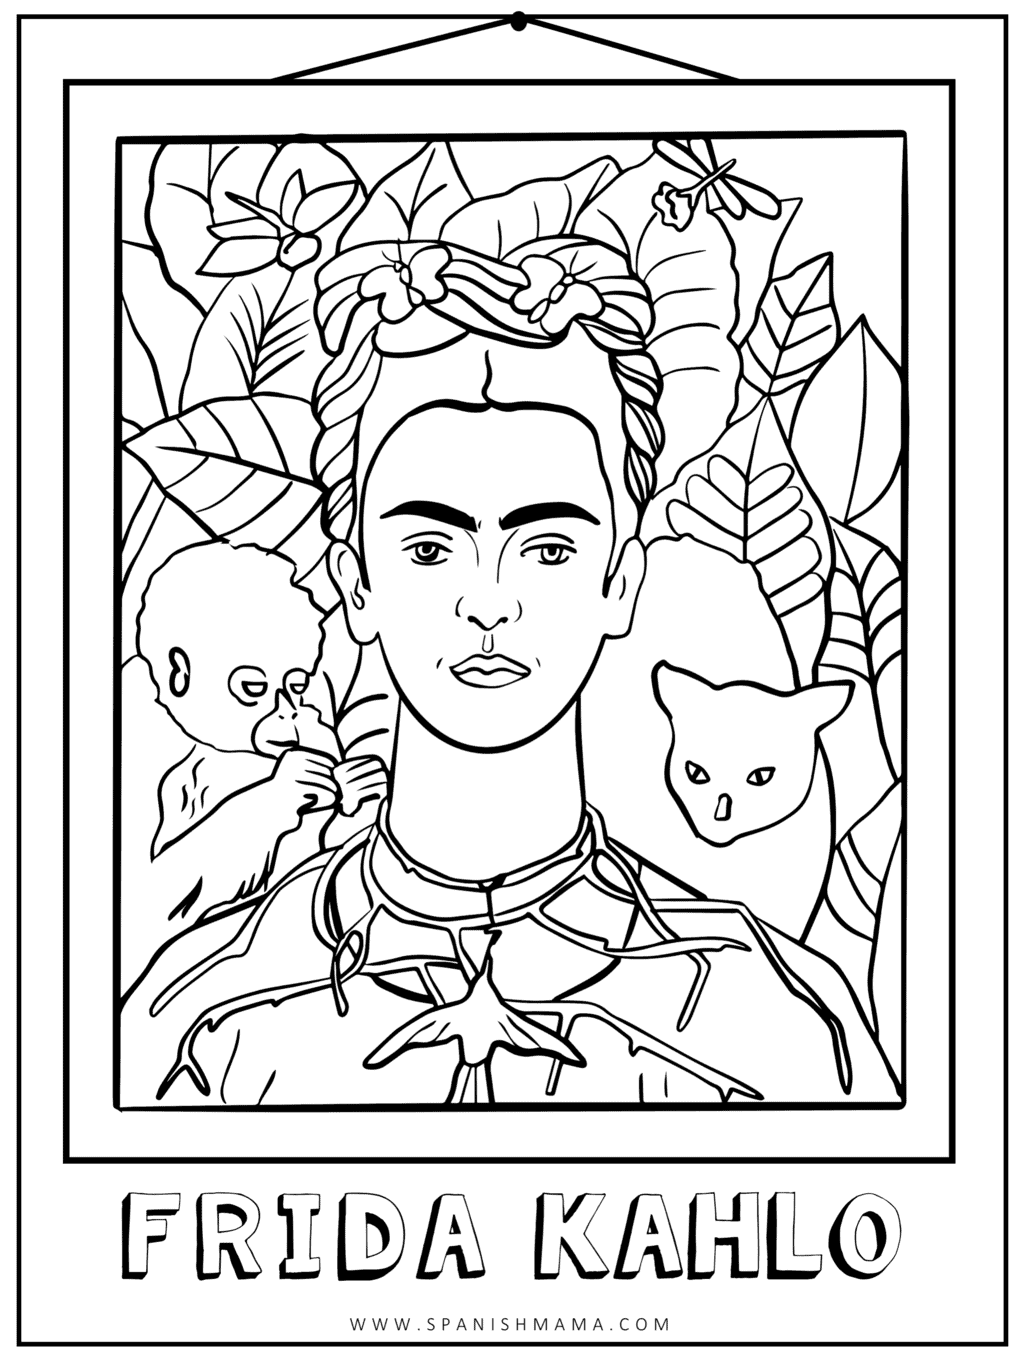 frida-kahlo-art-for-kid-projects-printables-and-biographies